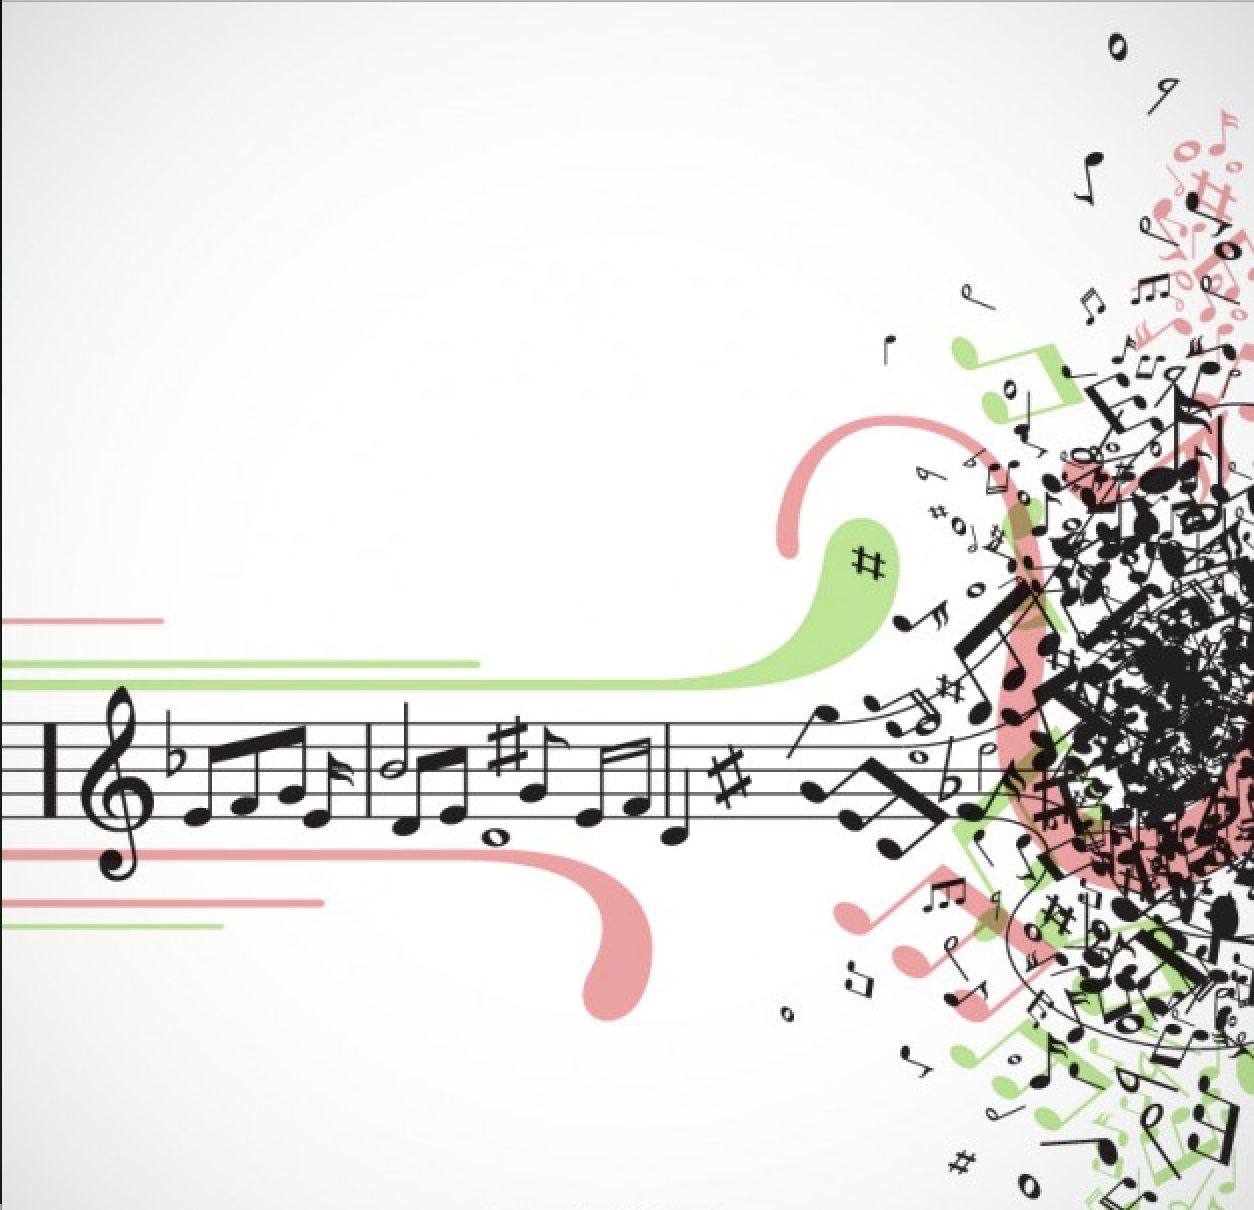 Studying Music Makes You Better at Languages